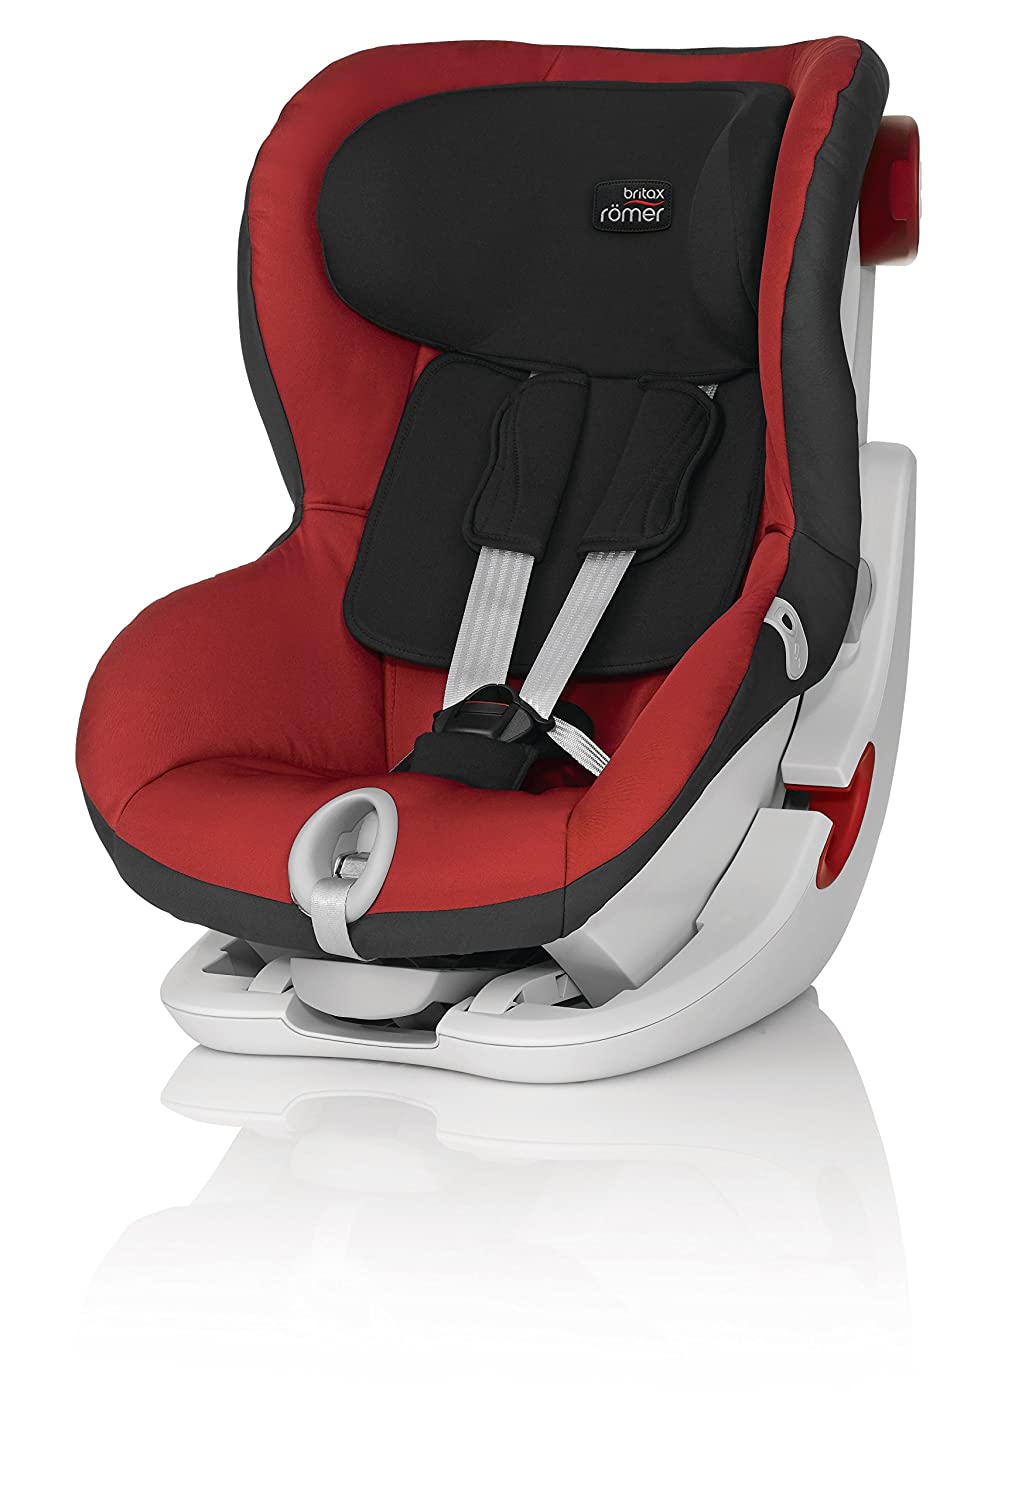 Britax Römer King II LS Car Seat Group 1 (9-18 kg), 2015, with Strap Chili Pepper